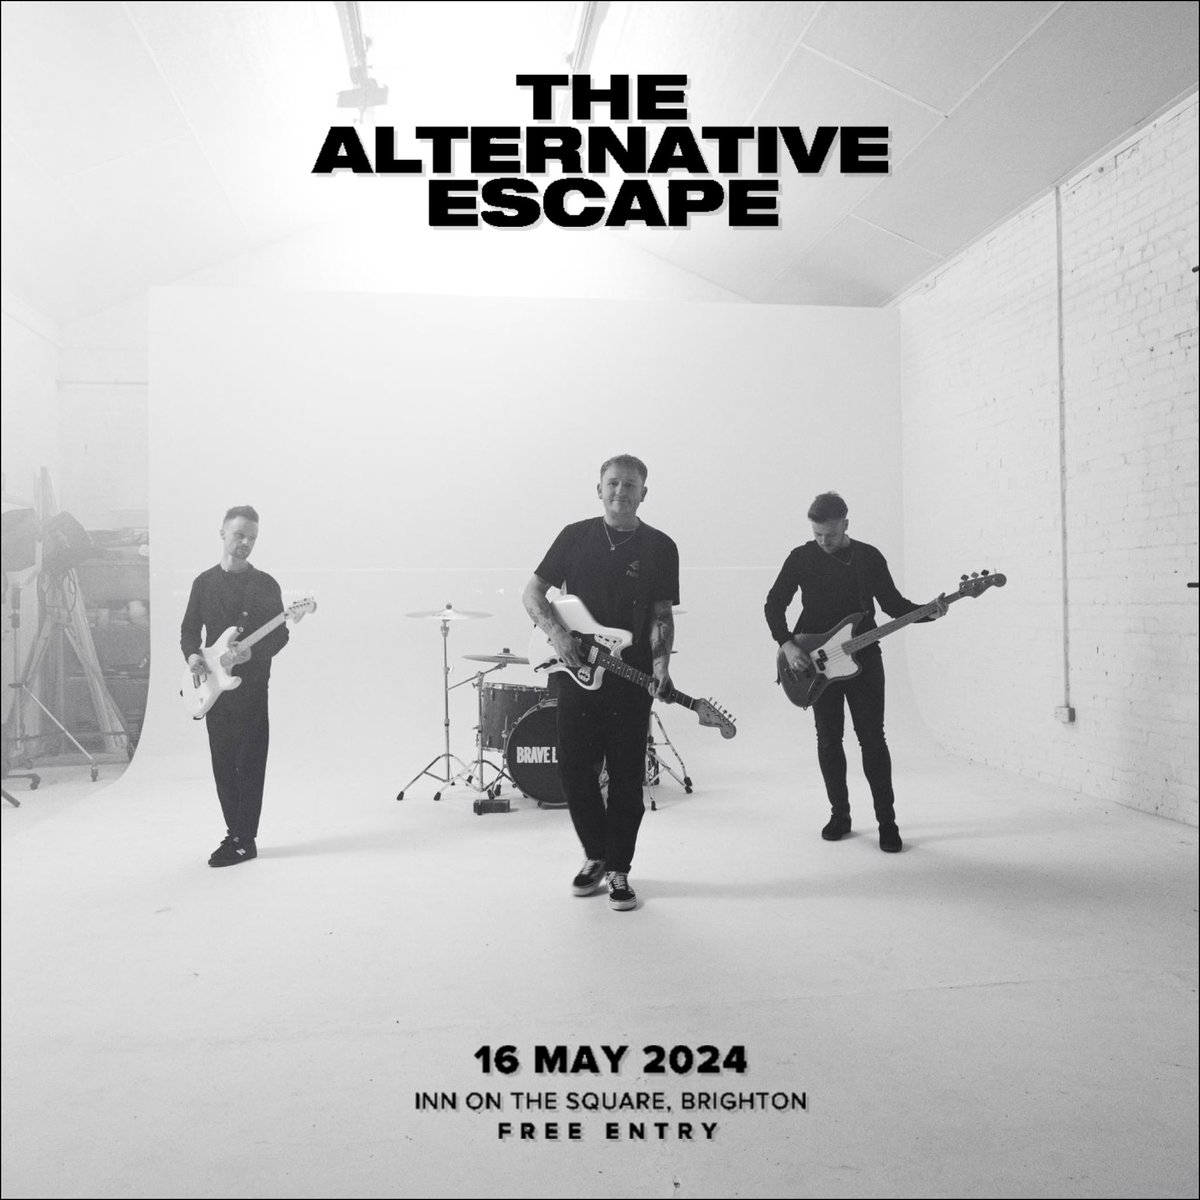 We’re coming Brighton! We land on the seaside this Thursday to play at The Inn on the Square as part of The Alternative Escape Festival. 🔥 On stage at 8:05pm and it’s free entry! No excuses. 🤝